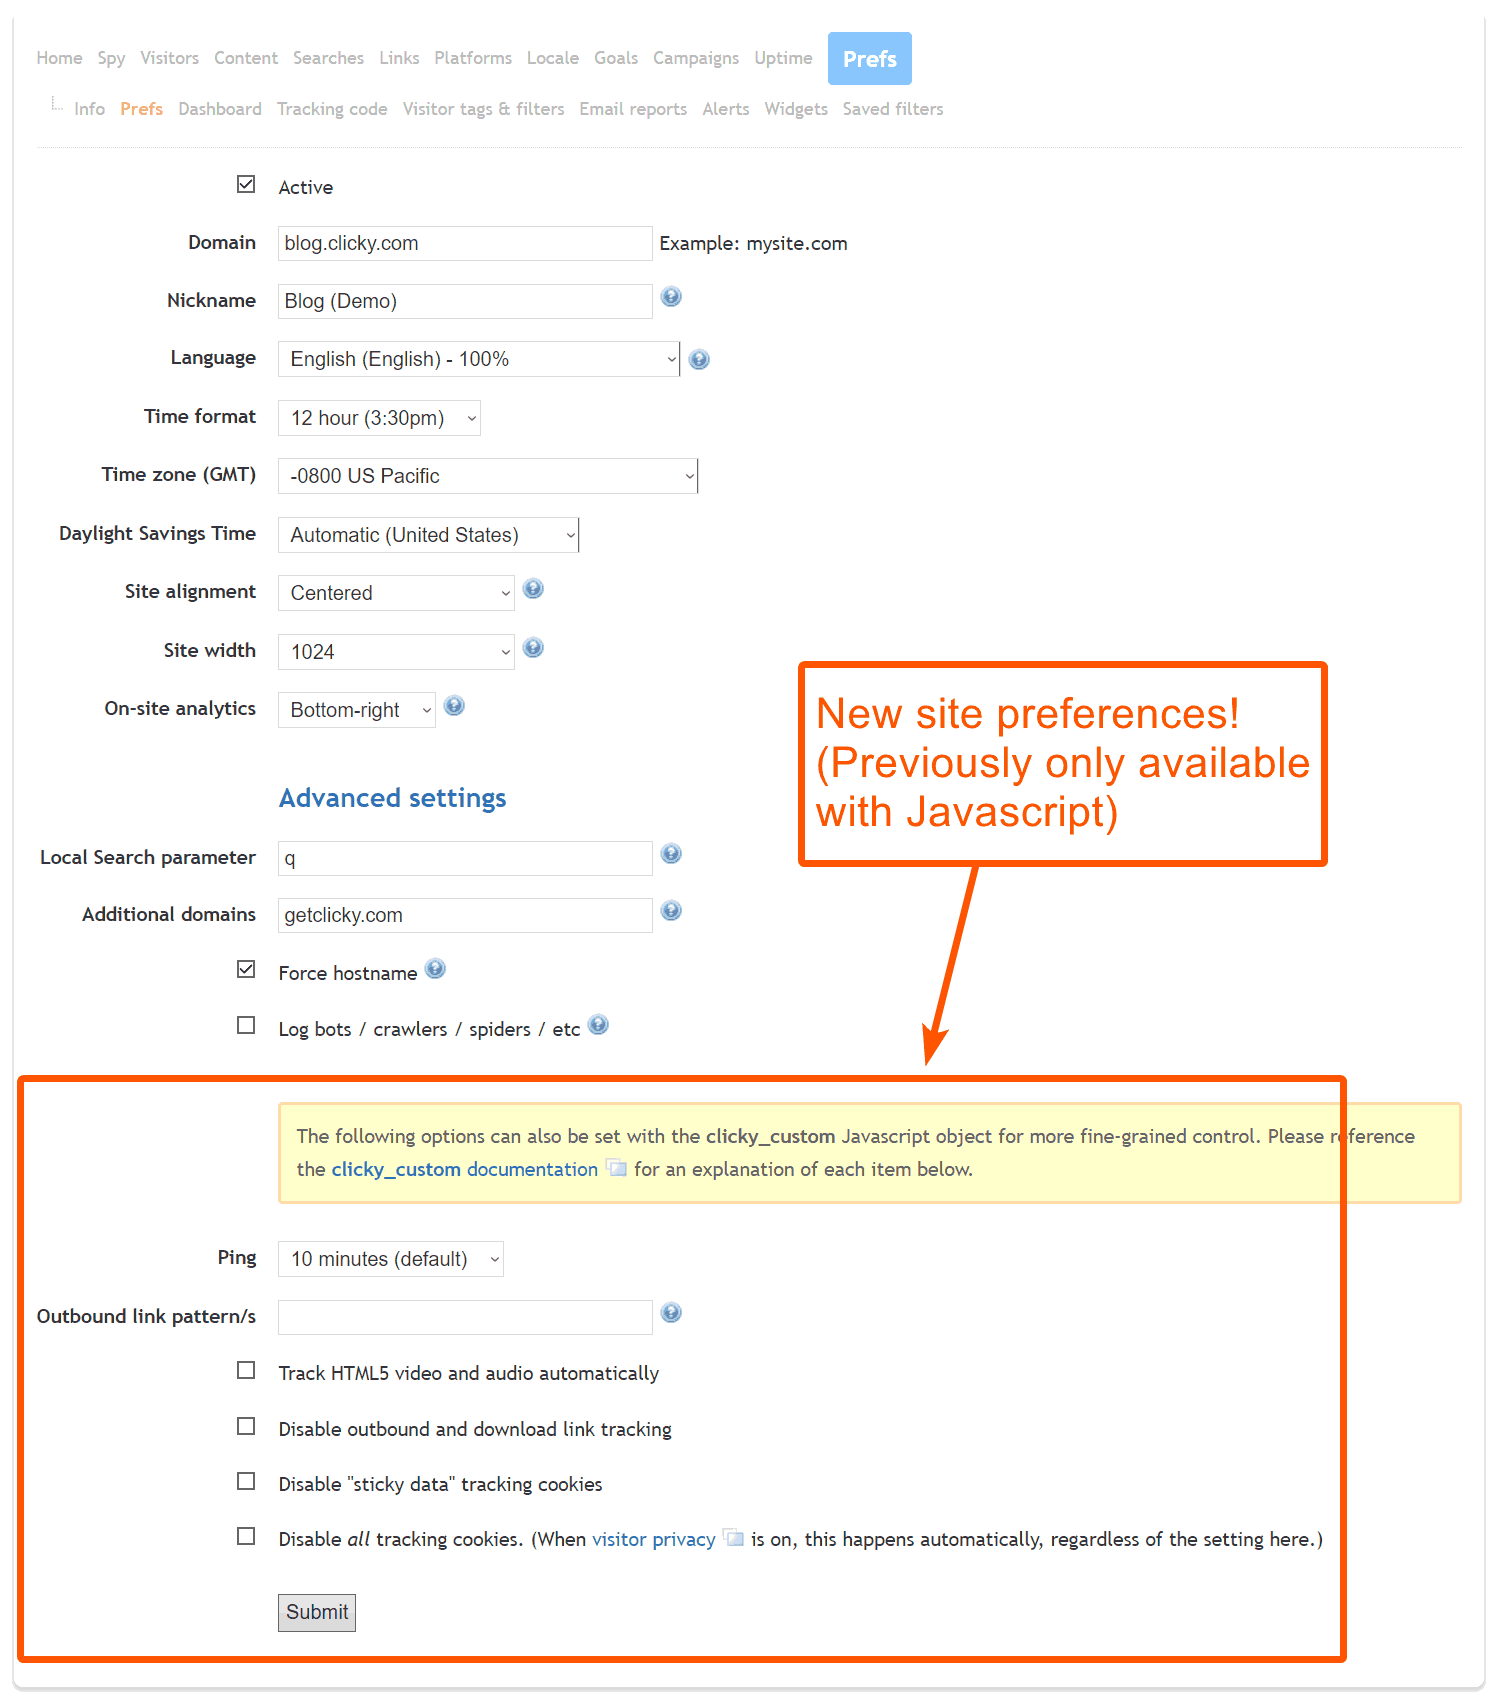 New site preferences